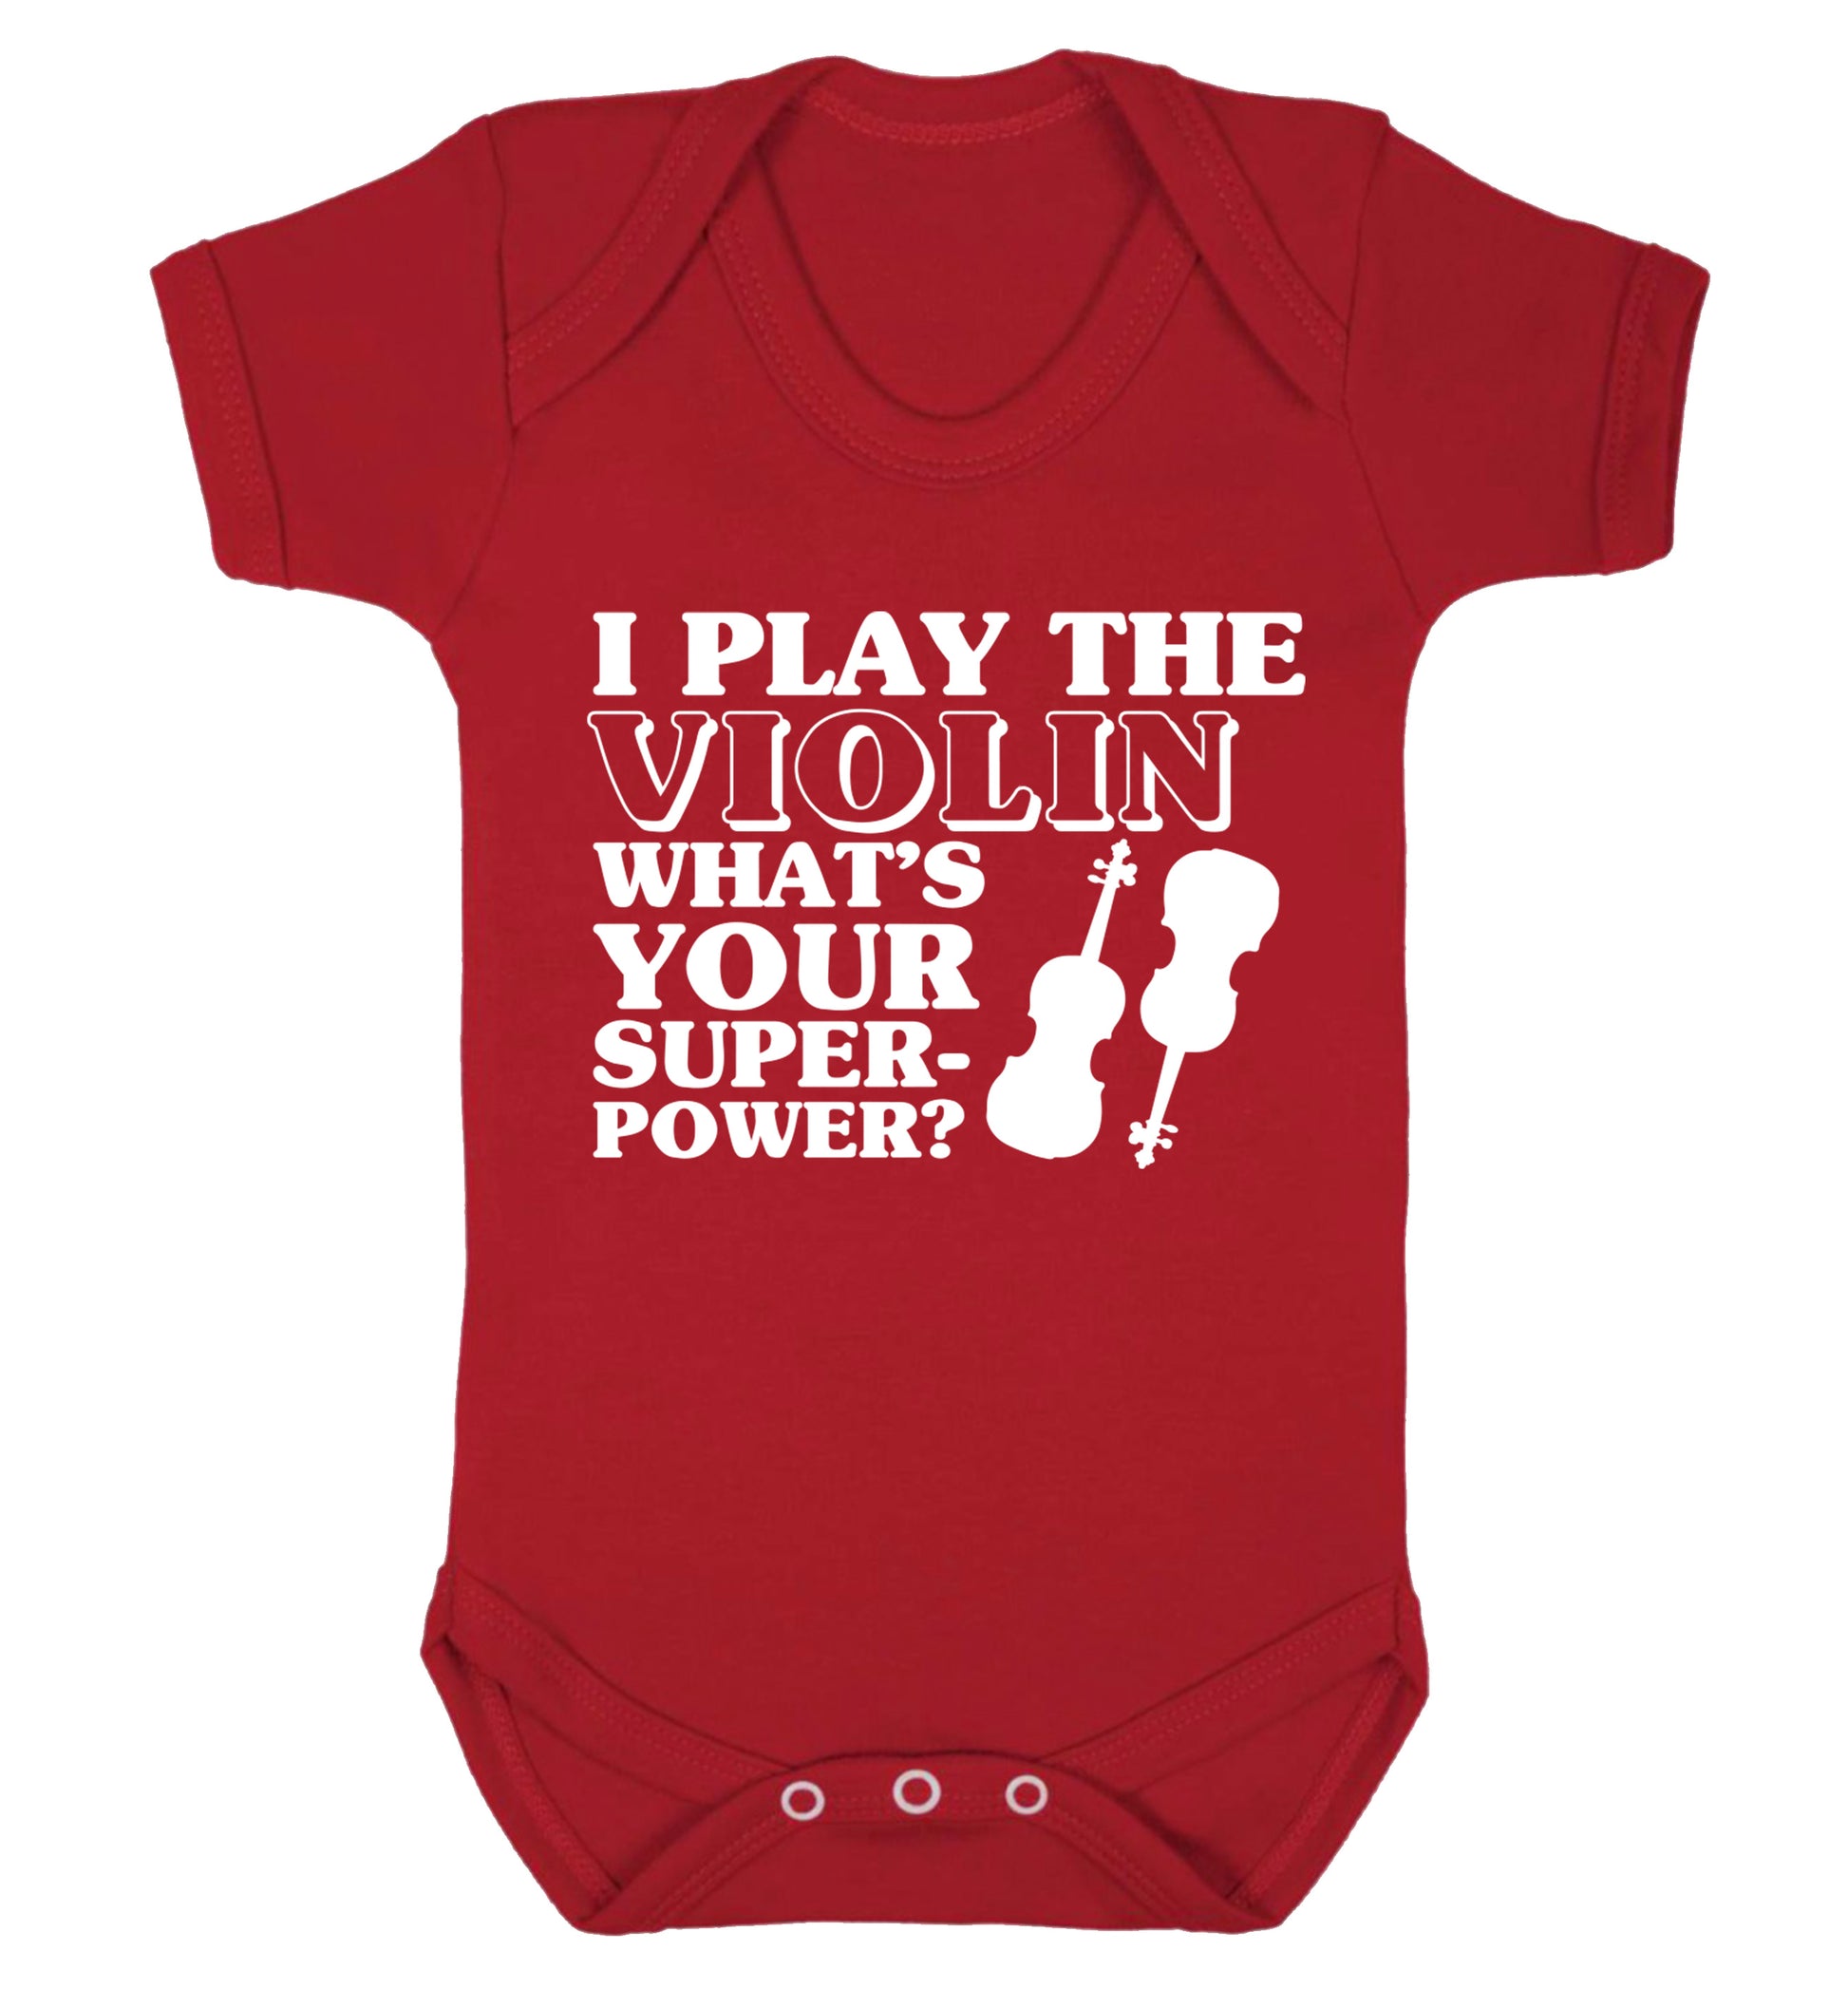 I Play Violin What's Your Superpower? Baby Vest red 18-24 months